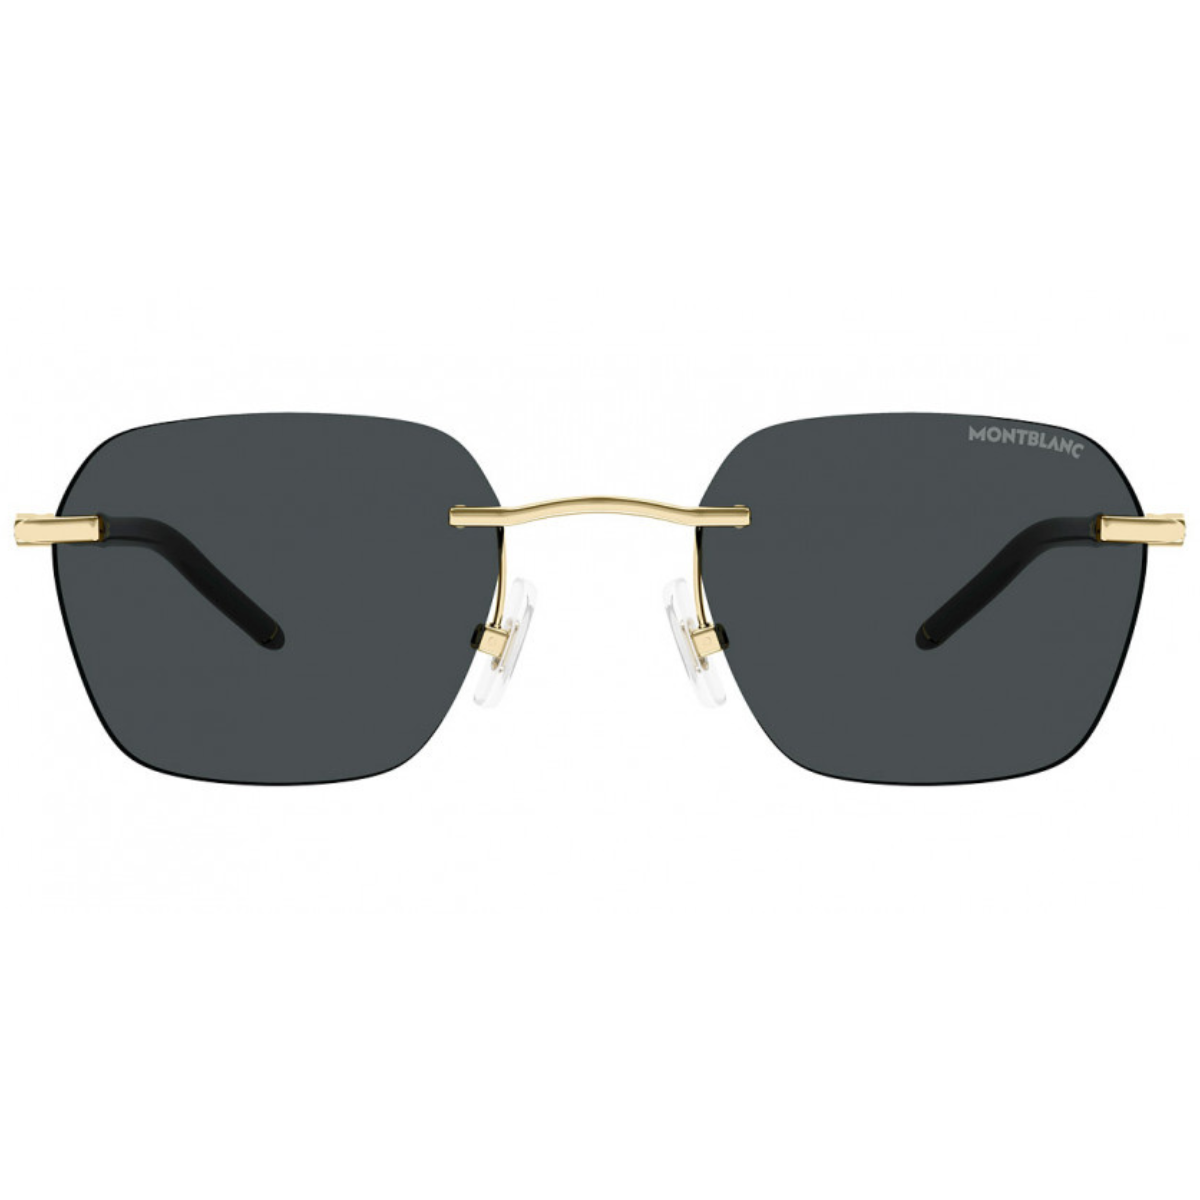 ""Upgrade your eyewear game with Mont Blanc MB0270S Square Sunglasses for Men at Optorium. Premium materials, dark grey lenses, and a classic square shape offer style and protection in one.""